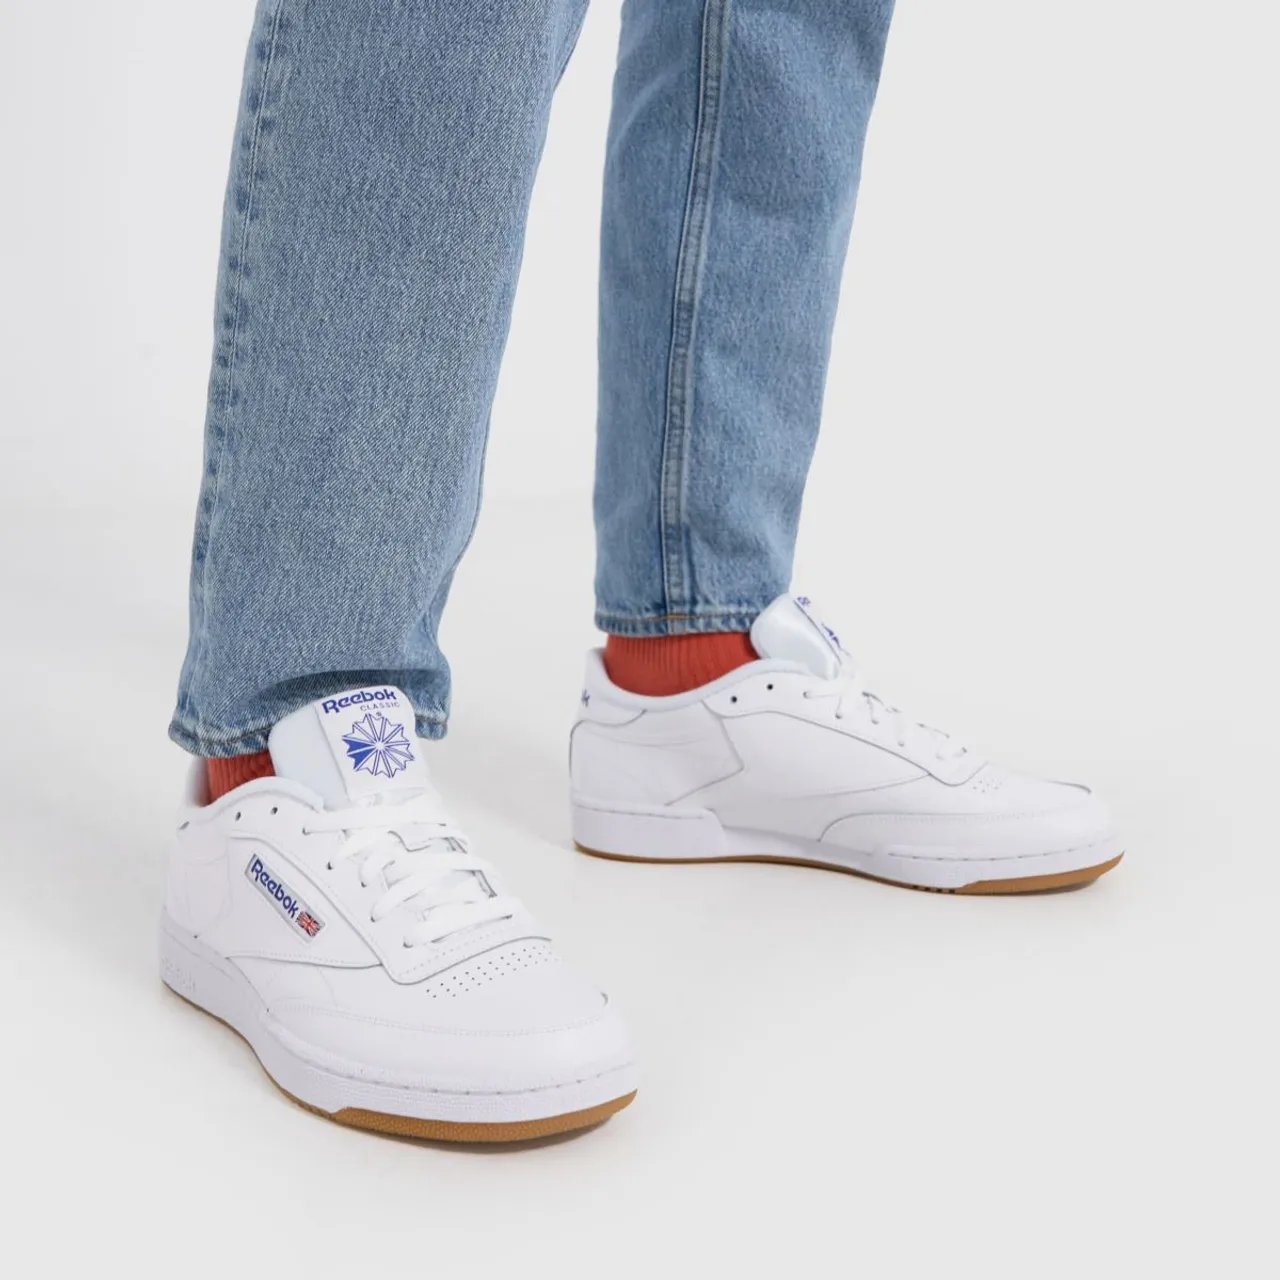 Reebok Club C 85 Trainers In White & Navy